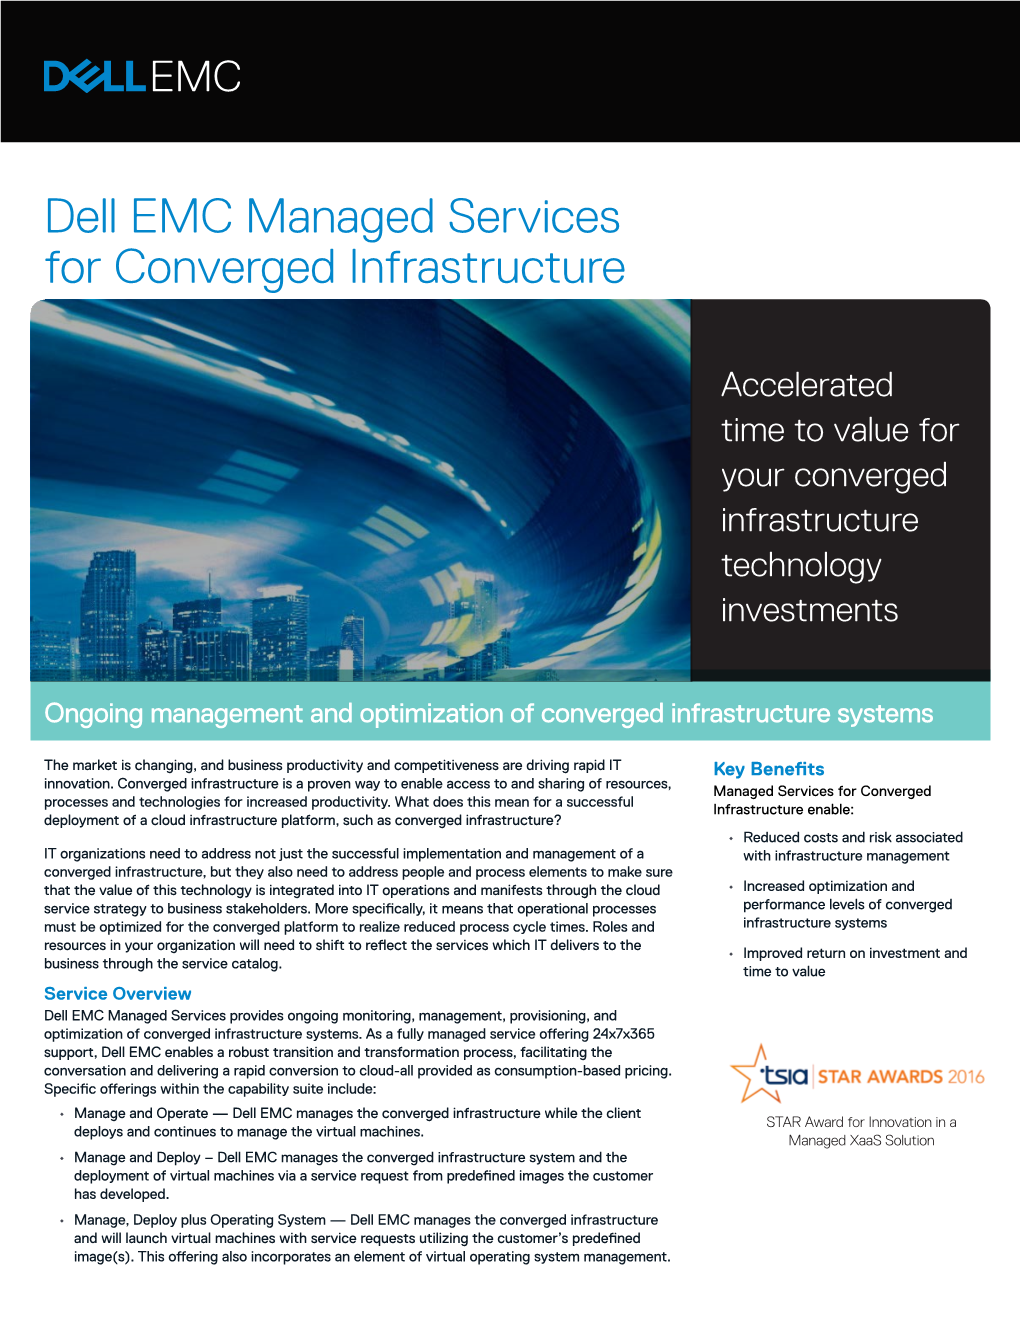 Dell EMC Managed Services for Converged Infrastructure